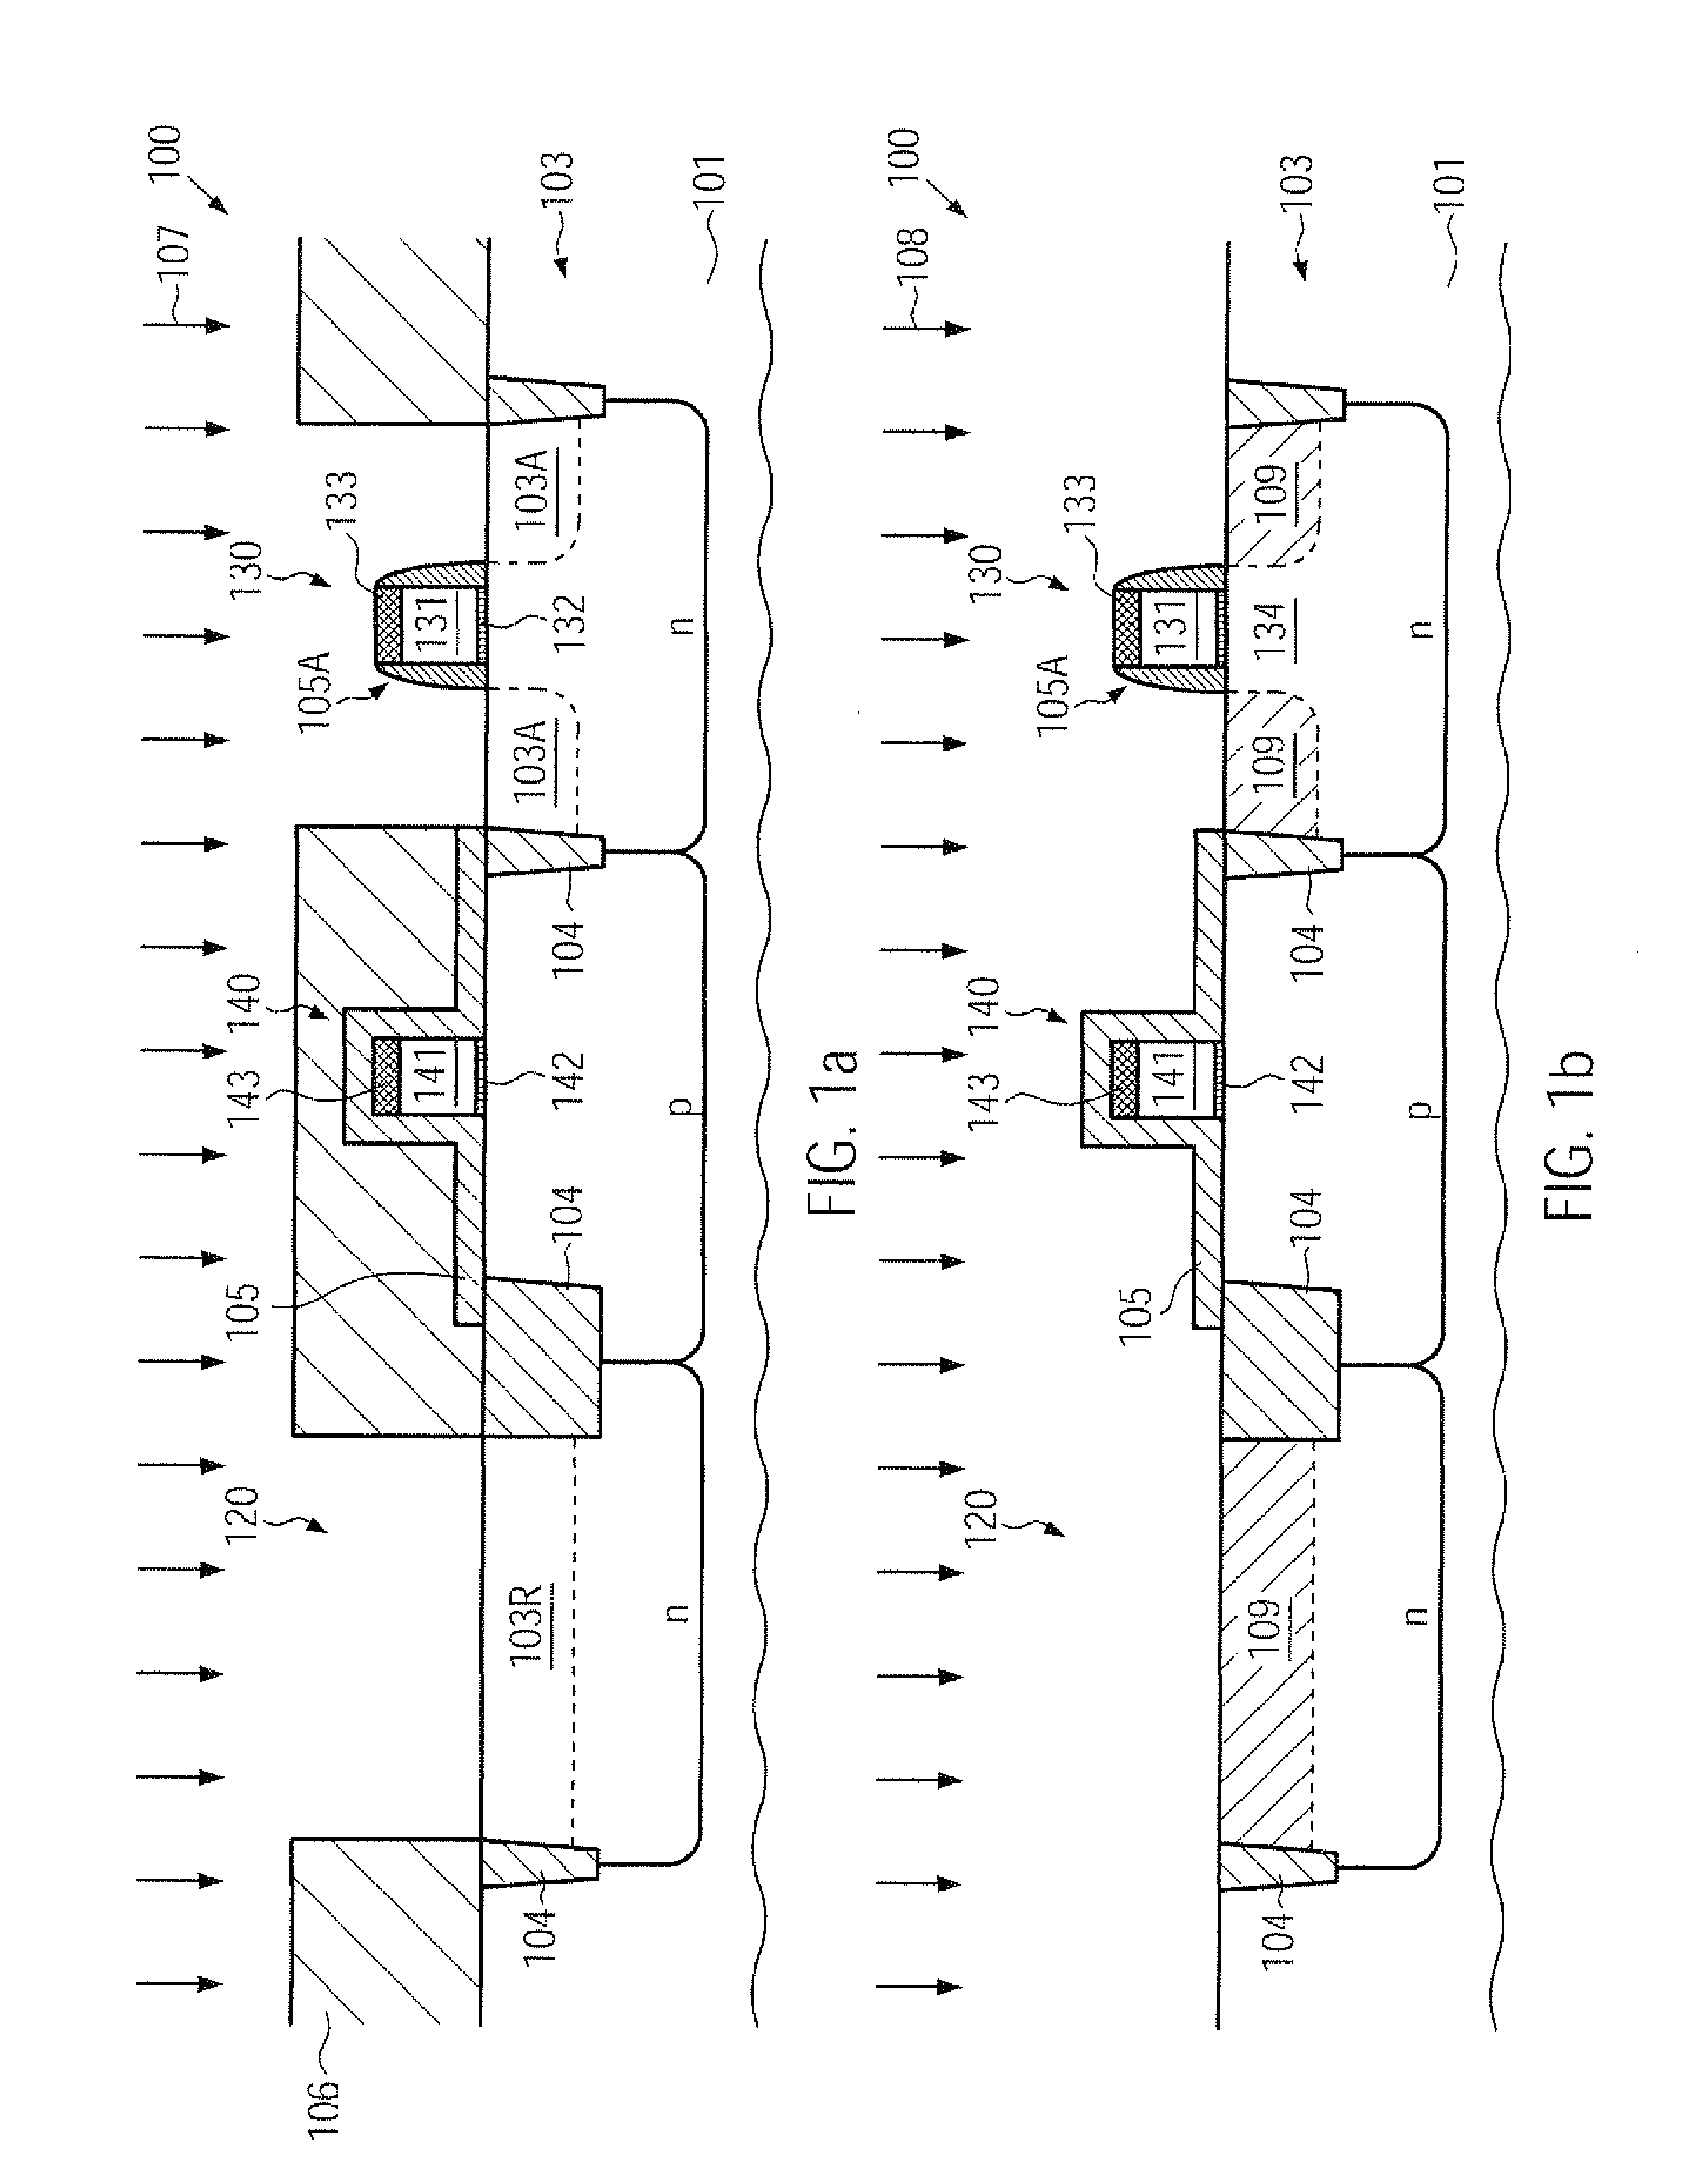 Temperature monitoring in a semiconductor device by using an pn junction based on silicon/germanium material